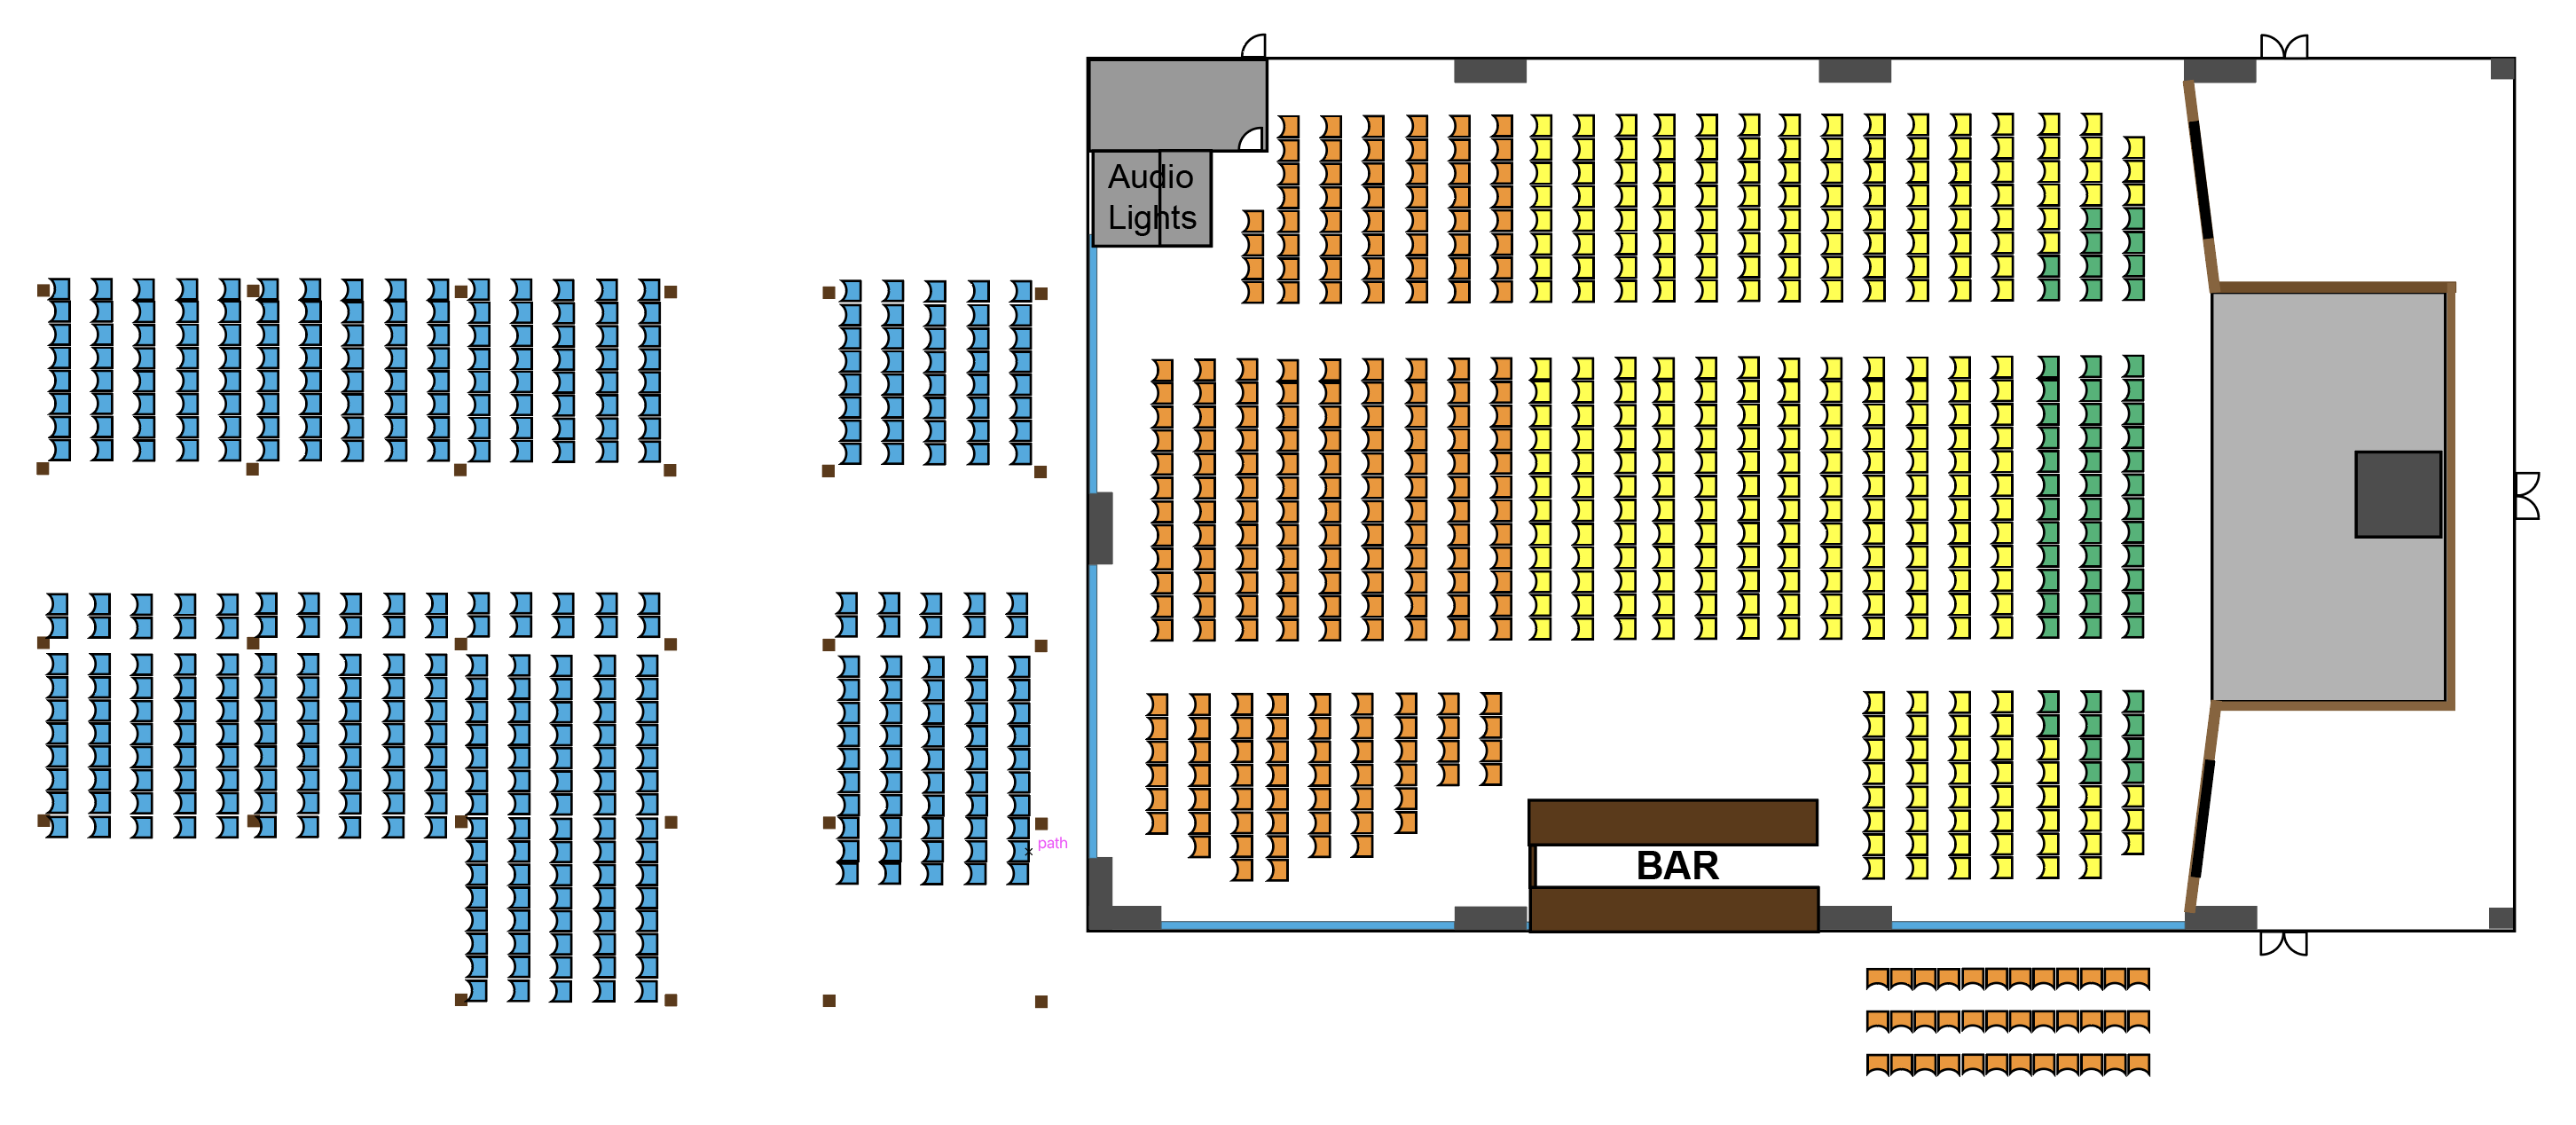 seating chart for live concerts